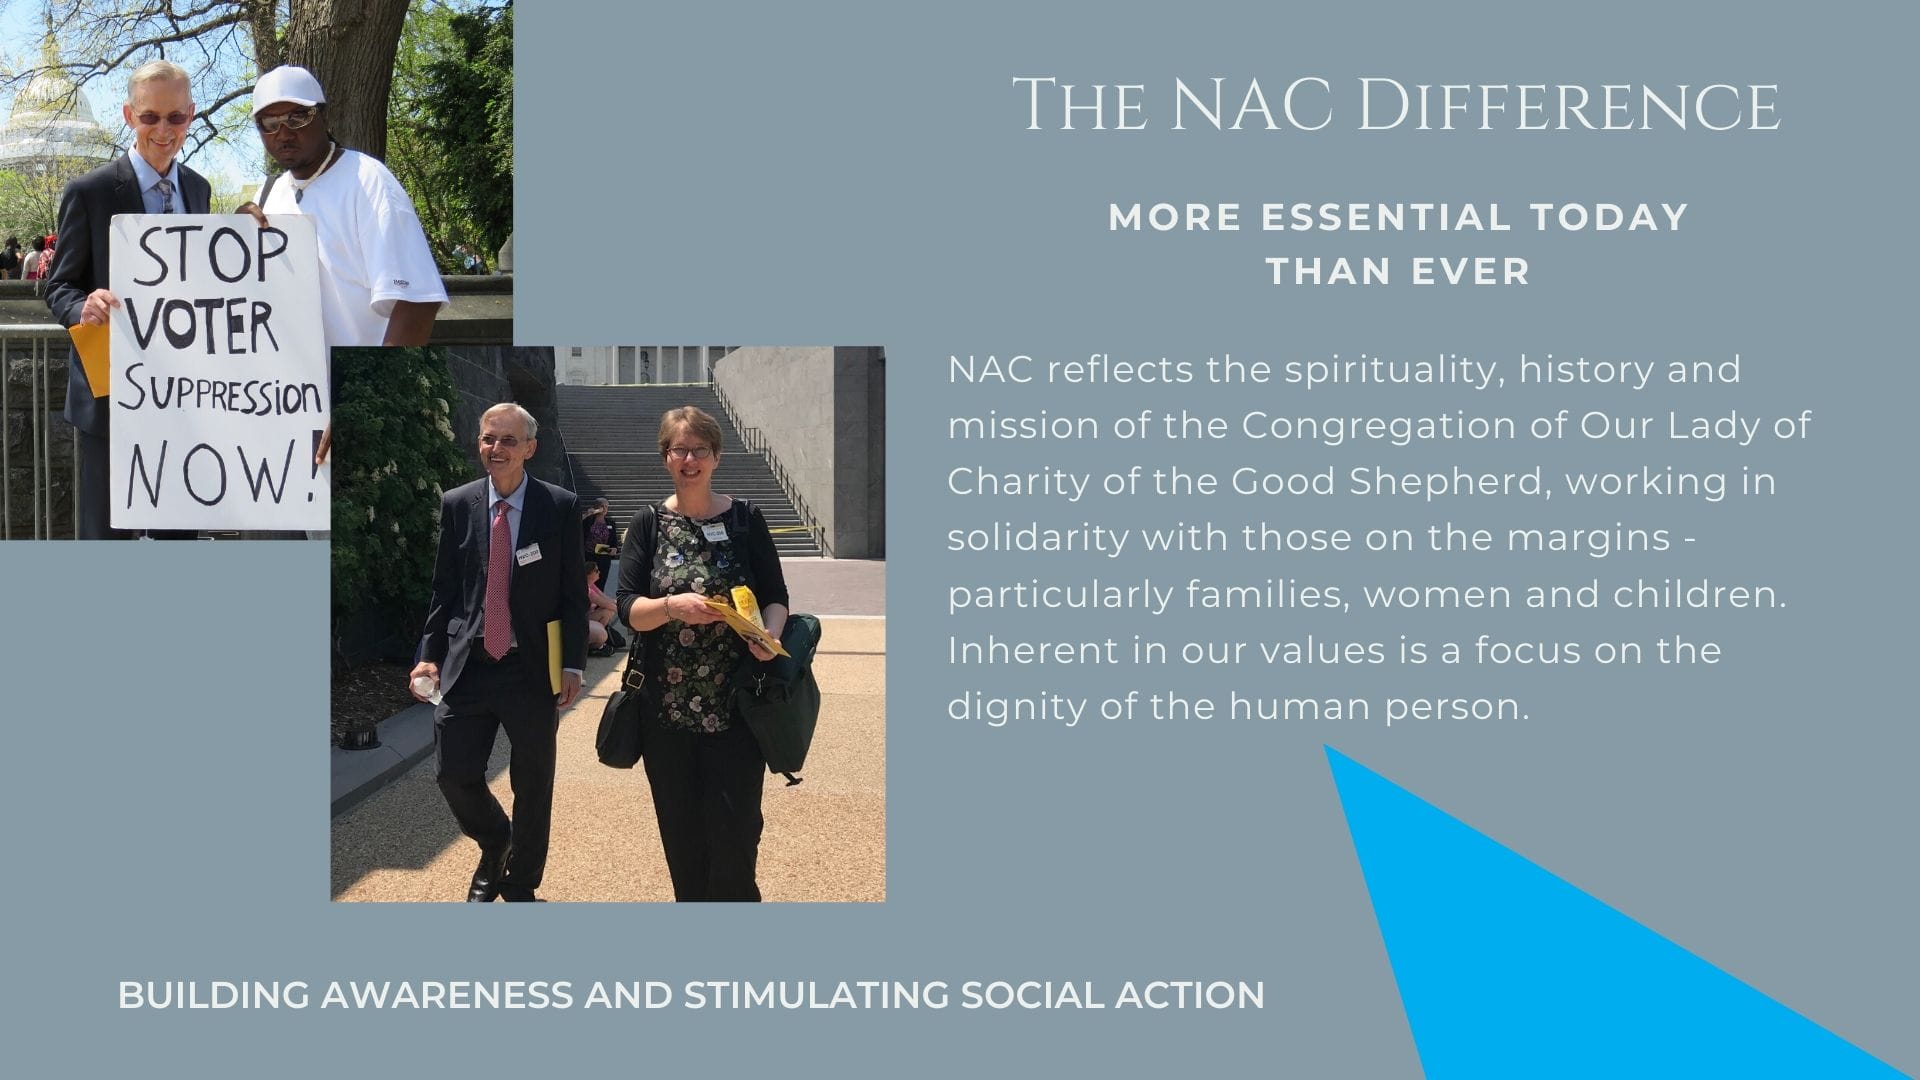 NAC2020 goals and plans